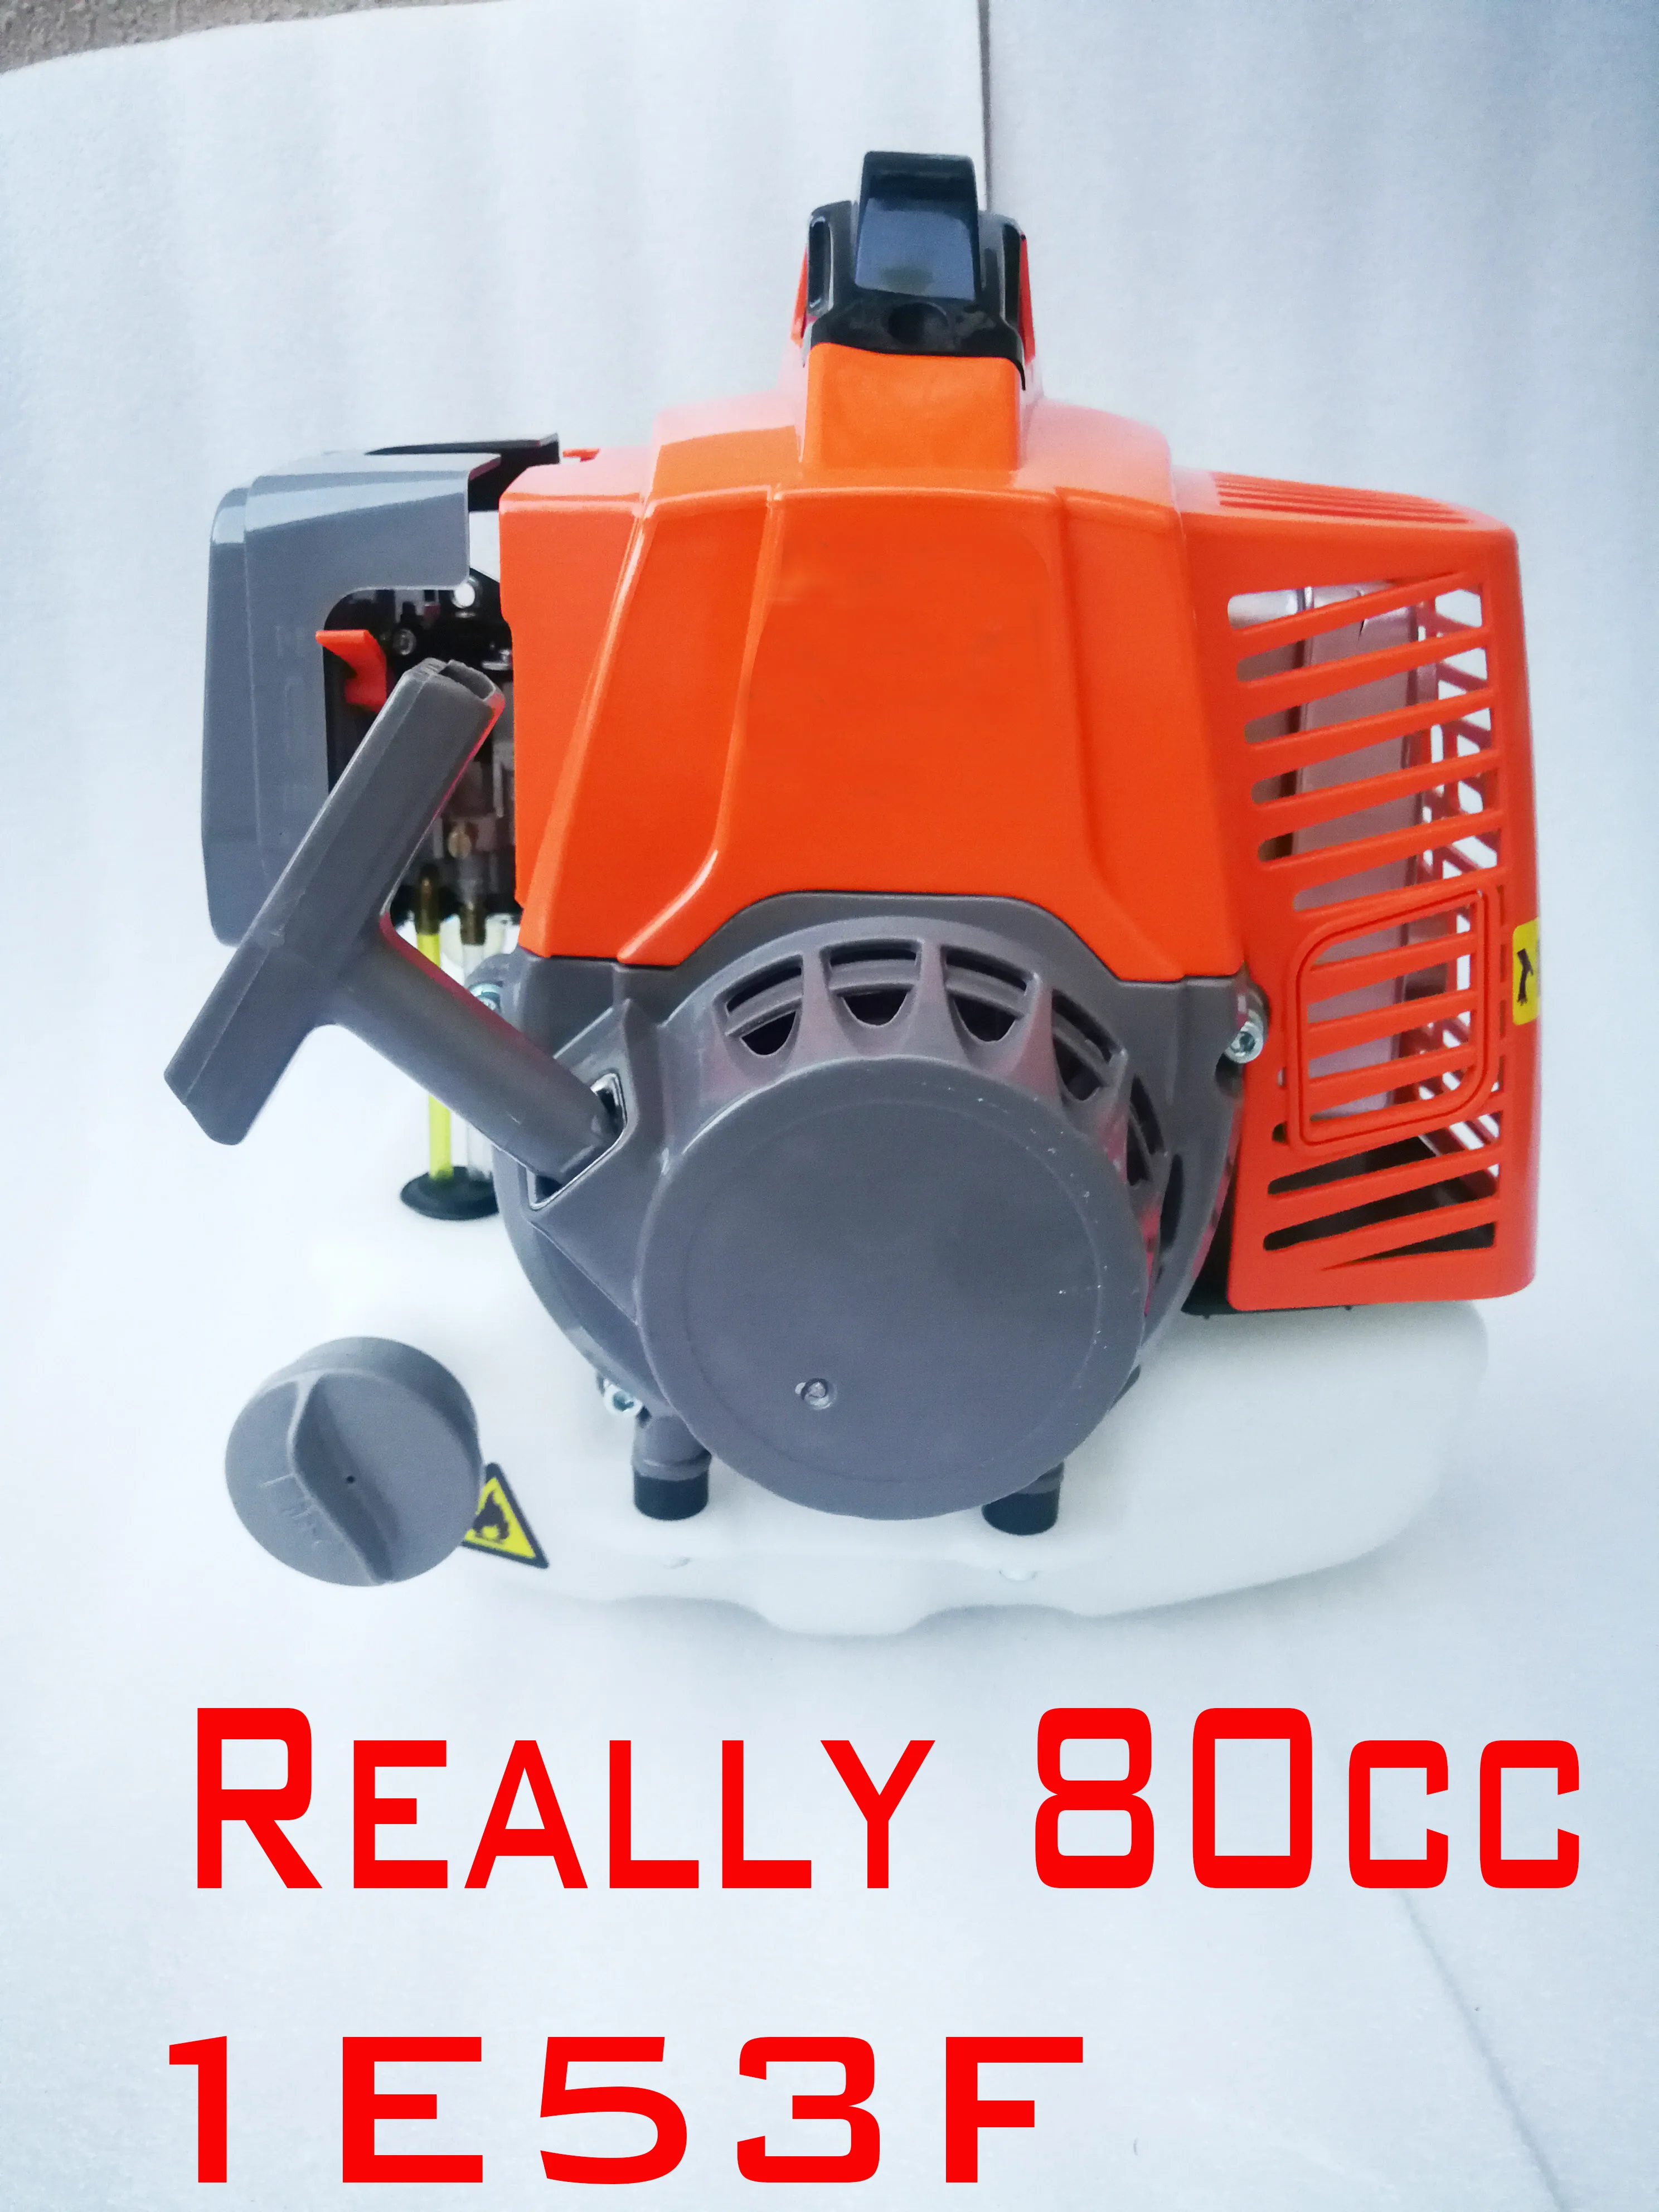 80CC Engine 2T Motor Petrol Brush Cutter Auger Scooter Motorbike Outboard Hugh Power Not 71cc 63cc Goped Big Bore 53mm enlarge